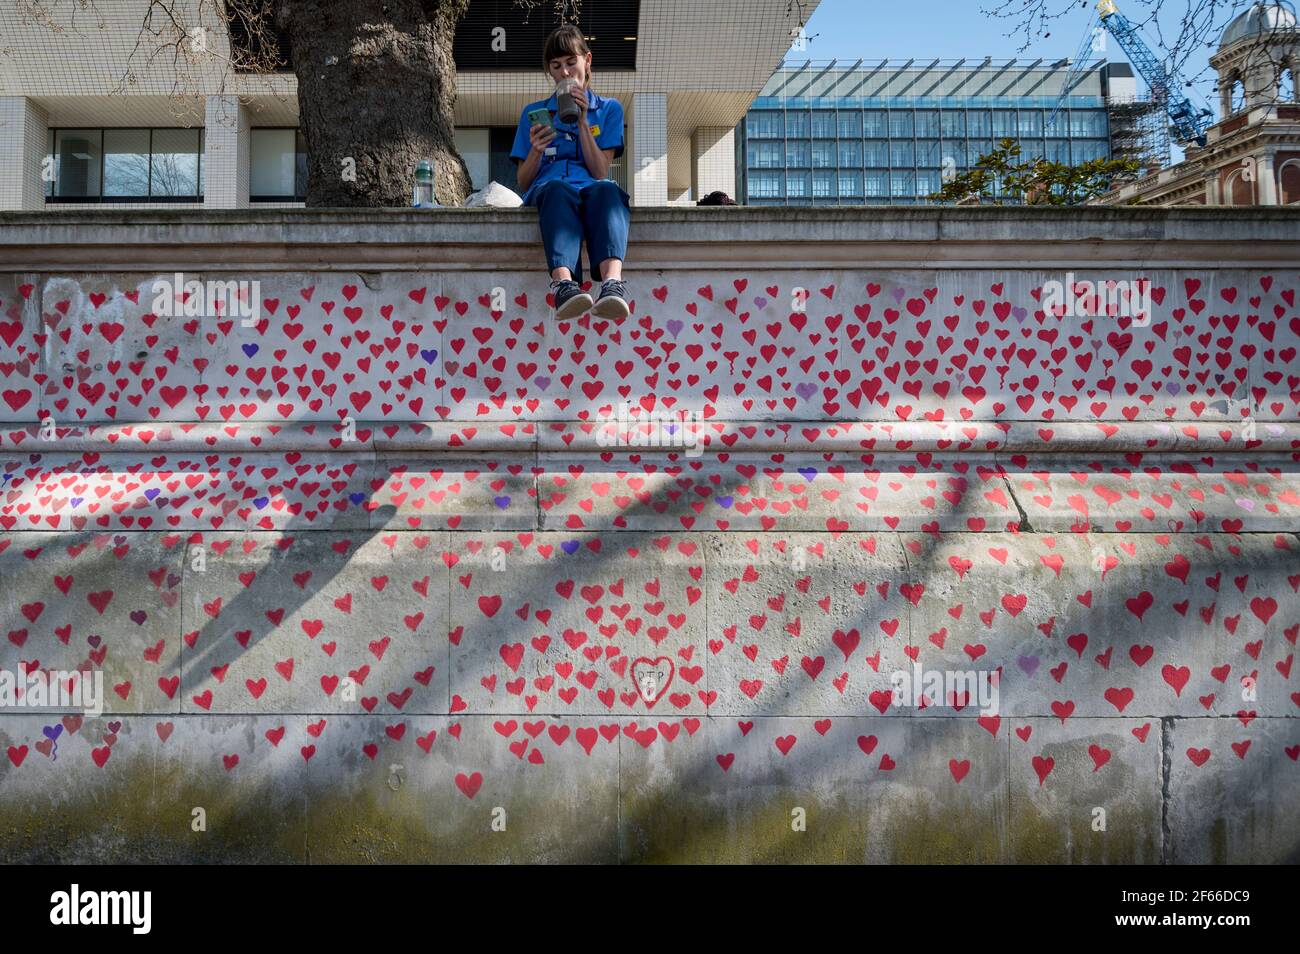 London, UK. 30th Mar, 2021. An NHS worker above hearts on a wall in Lambeth by the River Thames, with each heart representing someone who died during the UK's ongoing coronavirus pandemic. Called The National Covid Memorial Wall, it has been created by the Covid-19 Bereaved Families for Justice and will extend for half a mile by the time it is complete. Credit: Stephen Chung/Alamy Live News Stock Photo